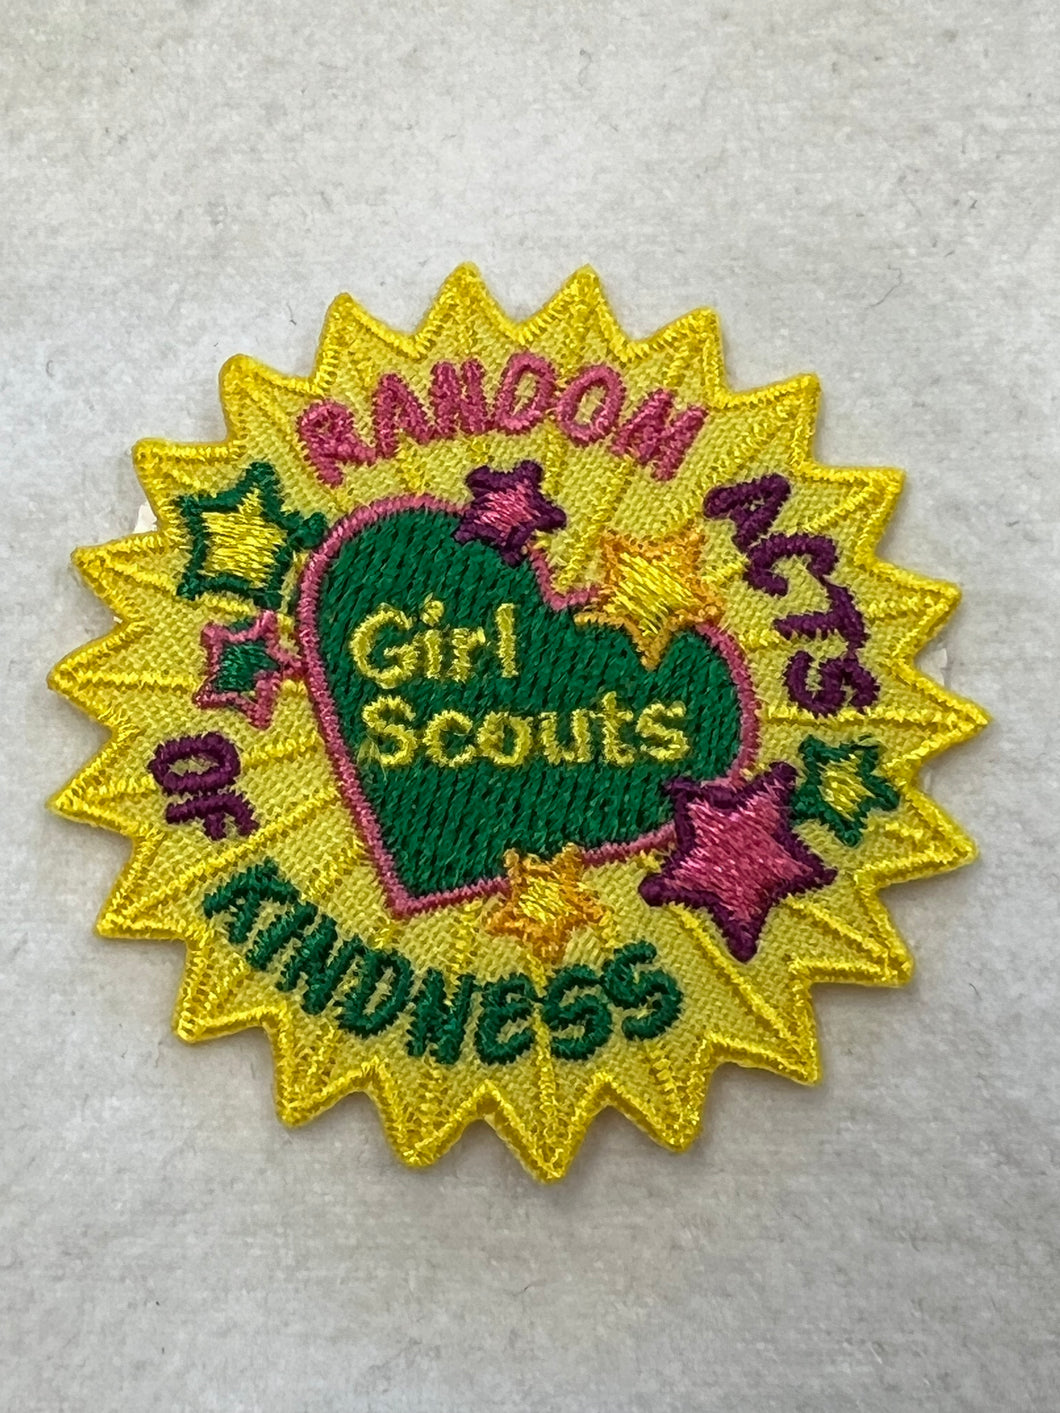 Girl Scouts random acts of kindness patch